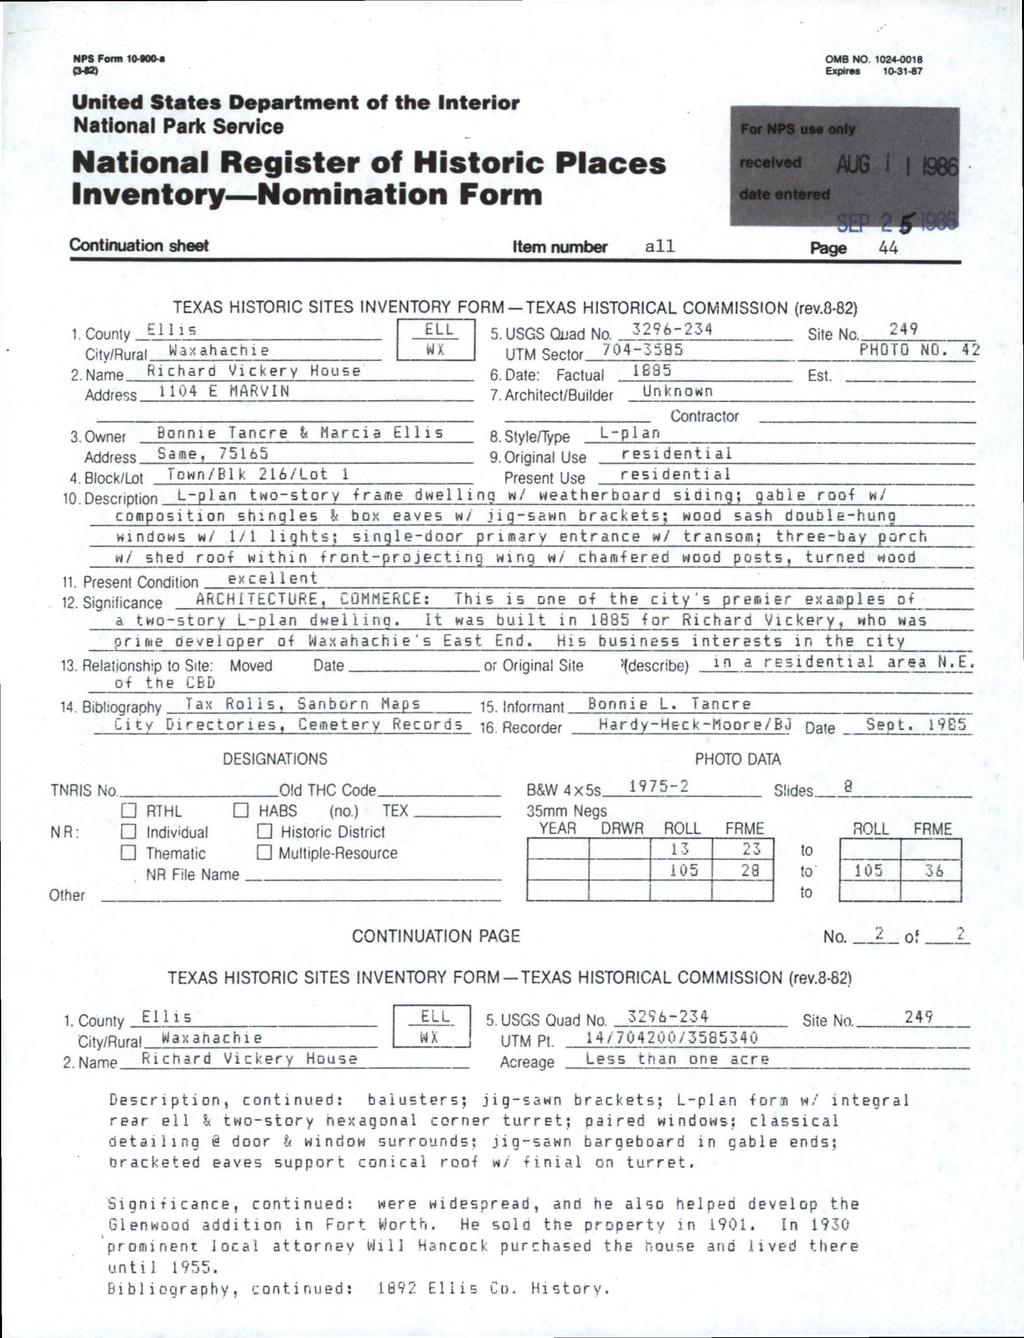 NPS Form 10-M)0-a 0«) United States Department off the Interior National Parle Sarvlce National Register off Historic Places Inventory Nomination Form OMB NO. 1024.0018 Expires 10-31.